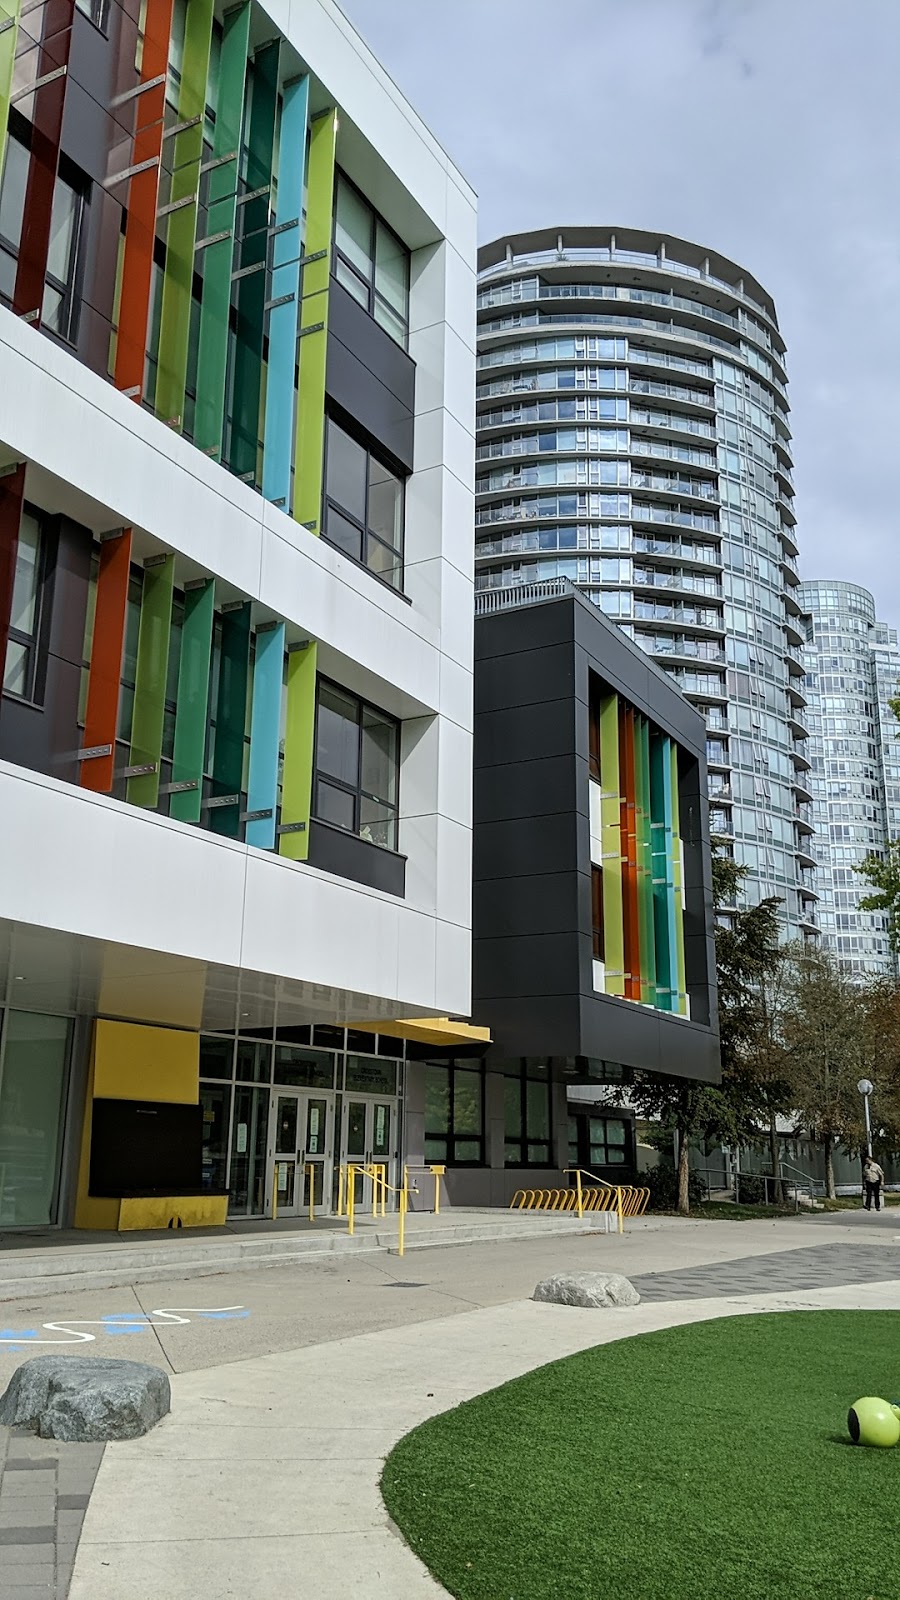 Crosstown Elementary School | school | 55 Expo Blvd, Vancouver, BC V6B 0P8, Canada | 6047135460 OR +1 604-713-5460